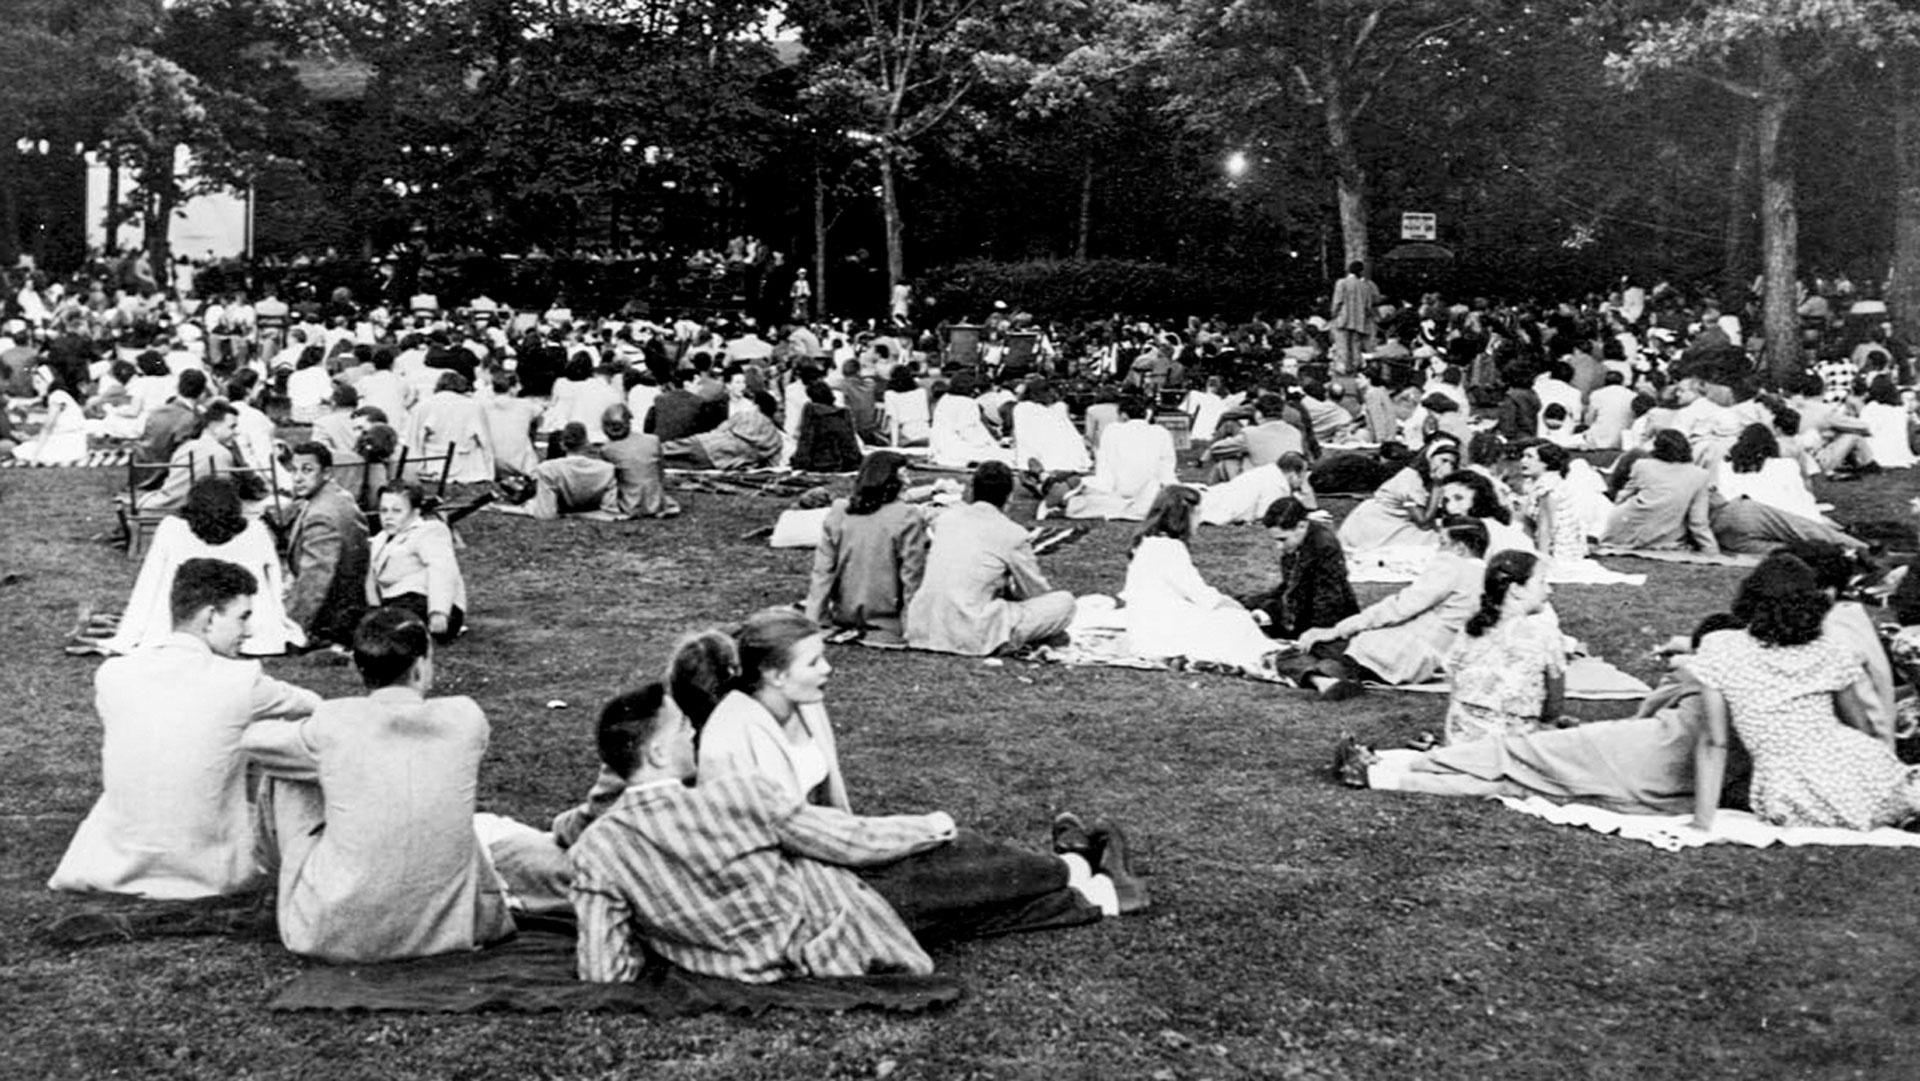 Ravinia Park lawn with many groups of people sitting on ground in 1940